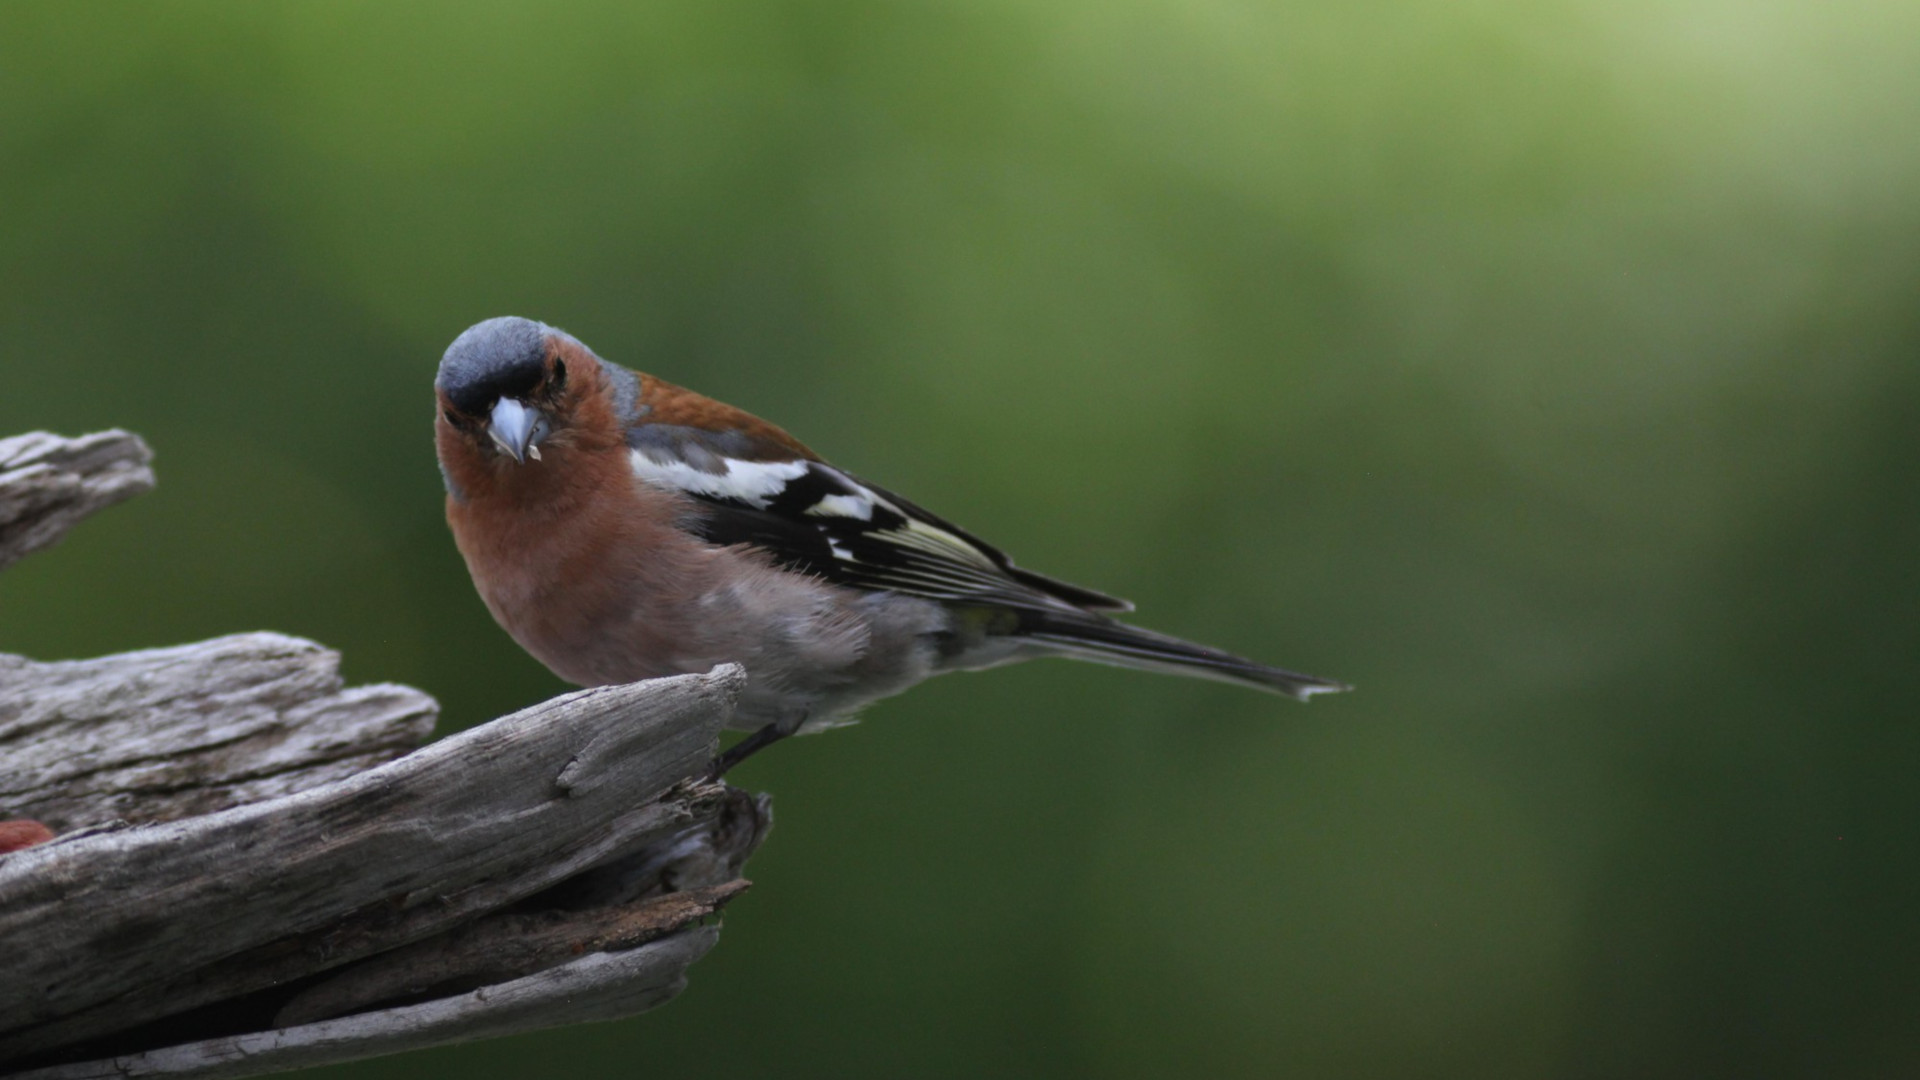 Chaffinch, taken with the Photography Scope, Image: Marcus Schenk